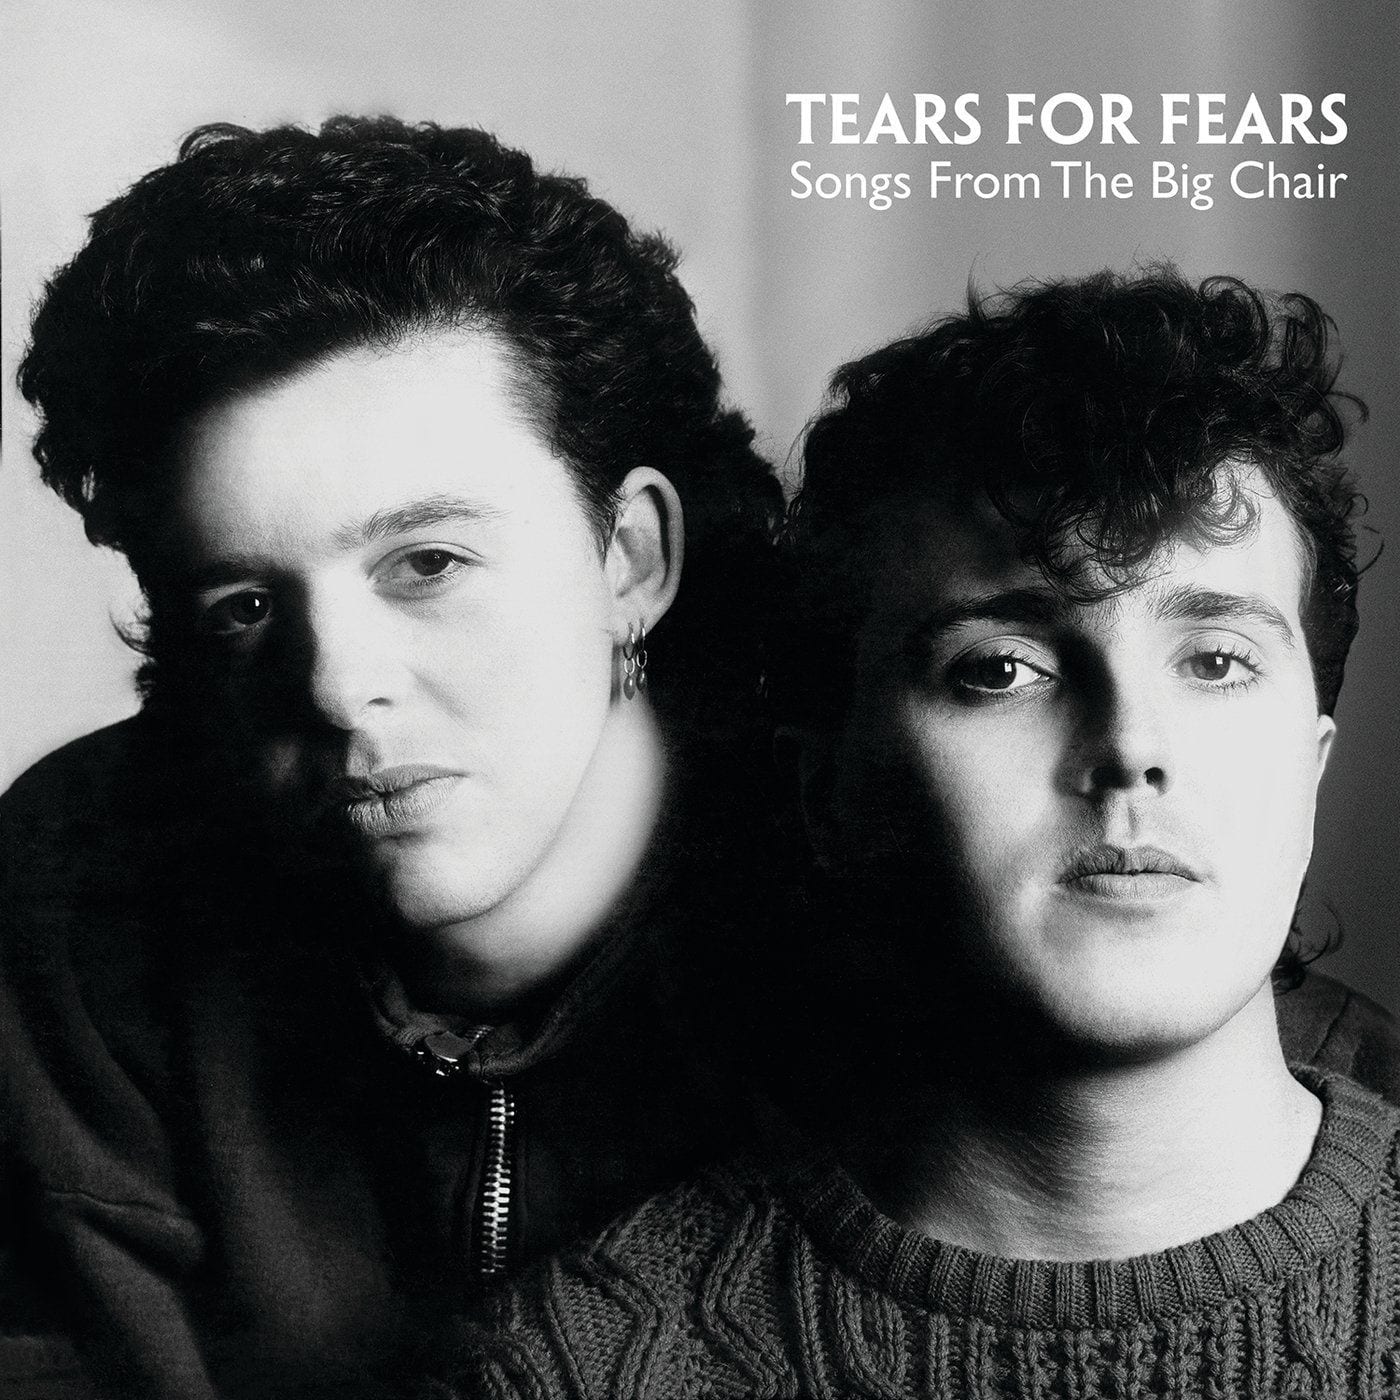 192469-counterbalance-tears-for-fears-songs-from-the-big-chair